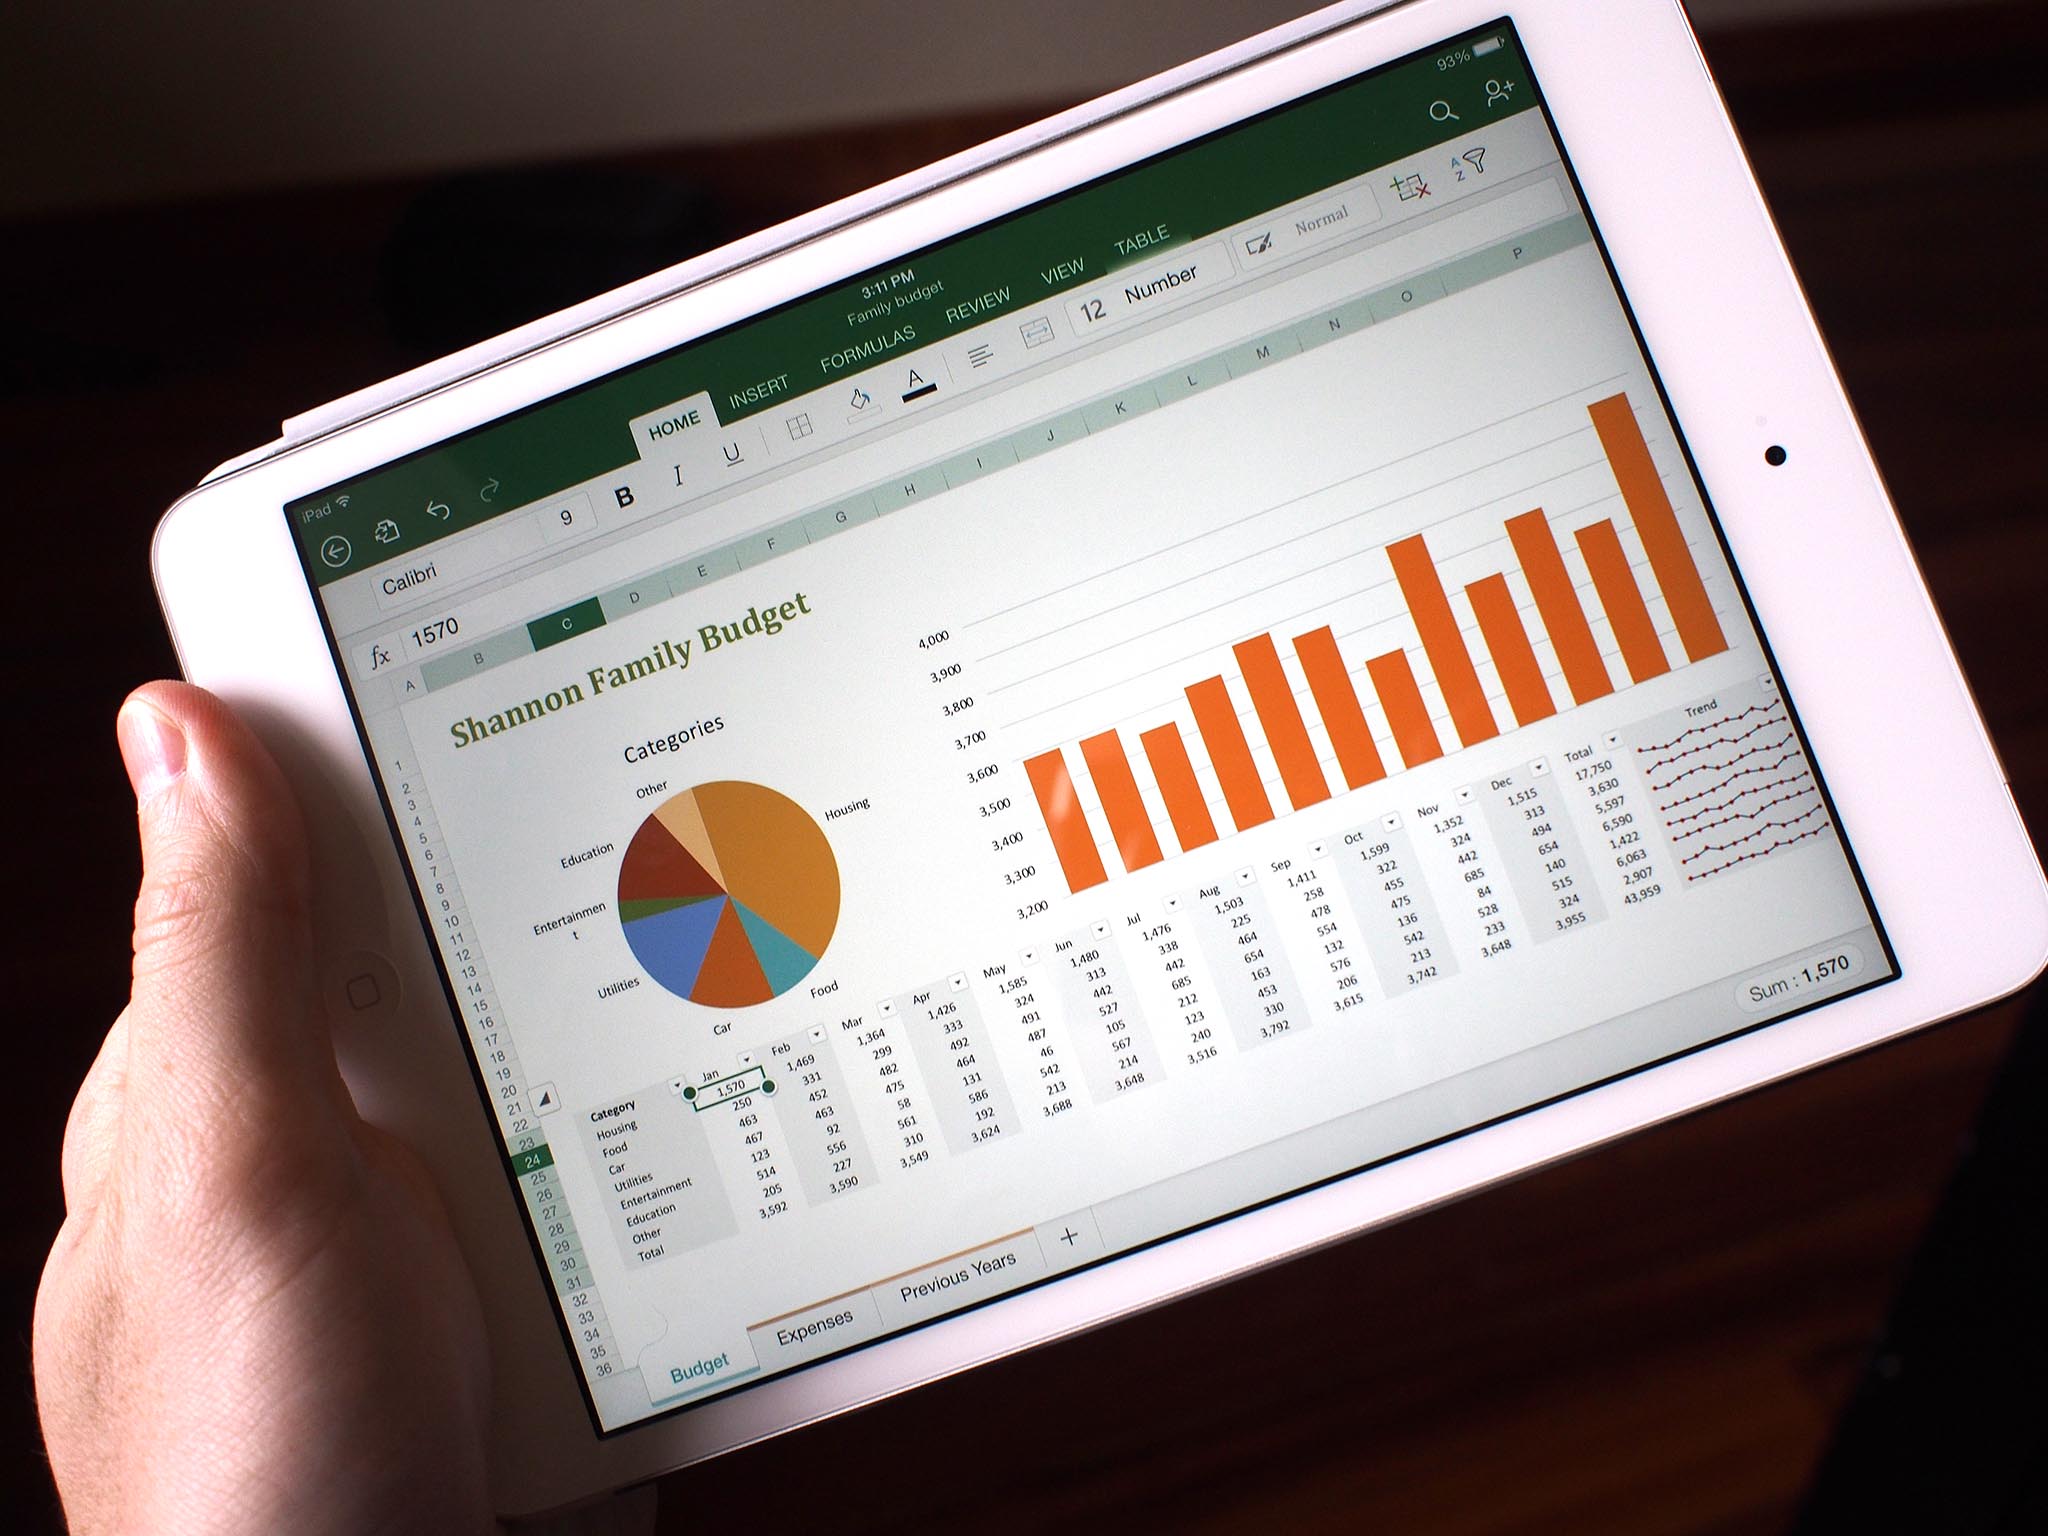 iPad versions of Microsoft Word, Excel, and PowerPoint now available in the App Store